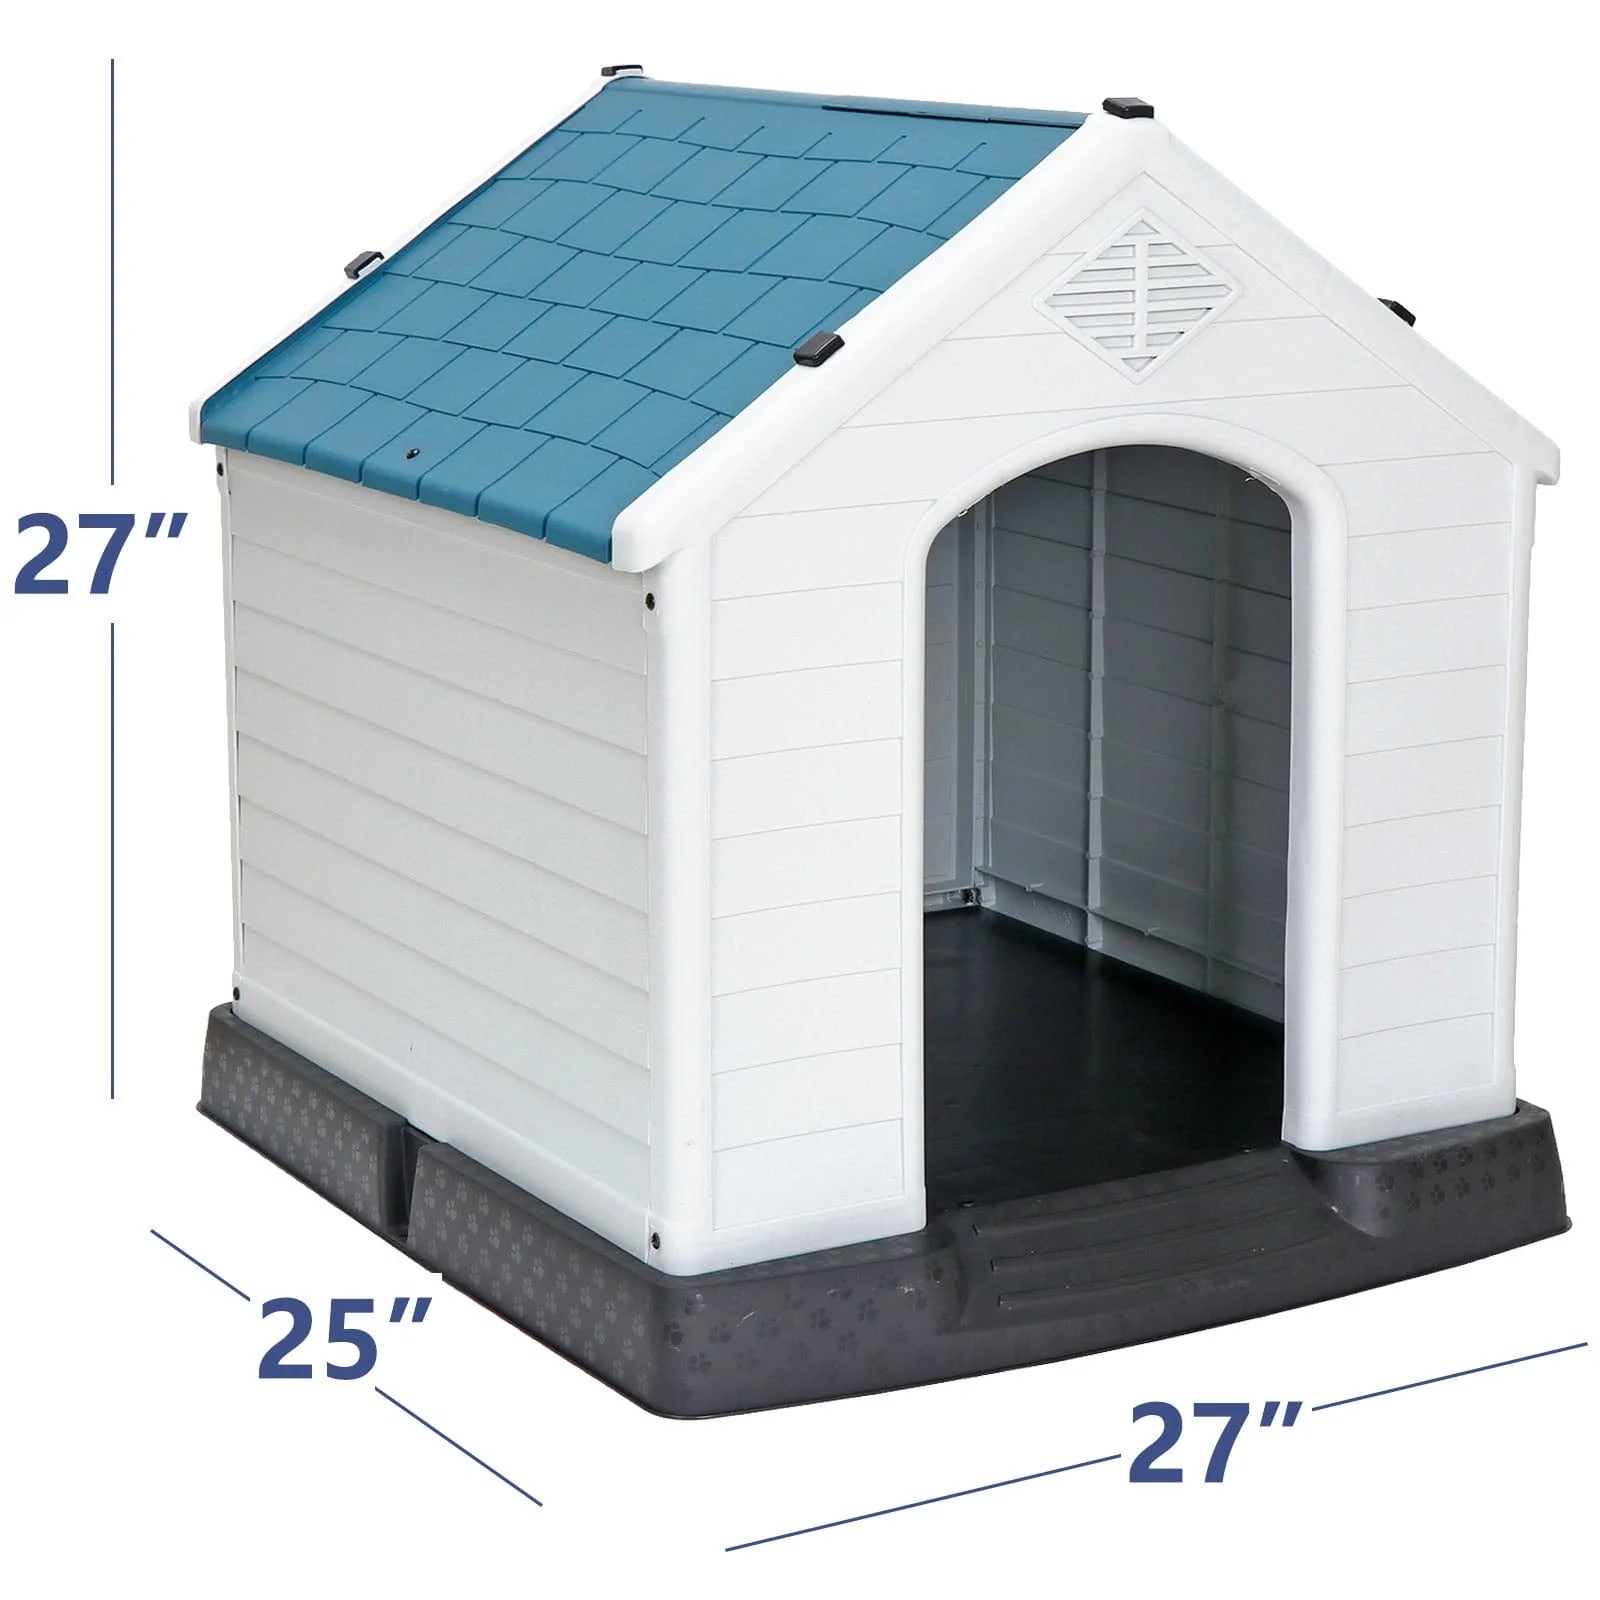 ZENY Plastic Indoor Outdoor Dog House Medium Pet Doghouse White, Blue Roof